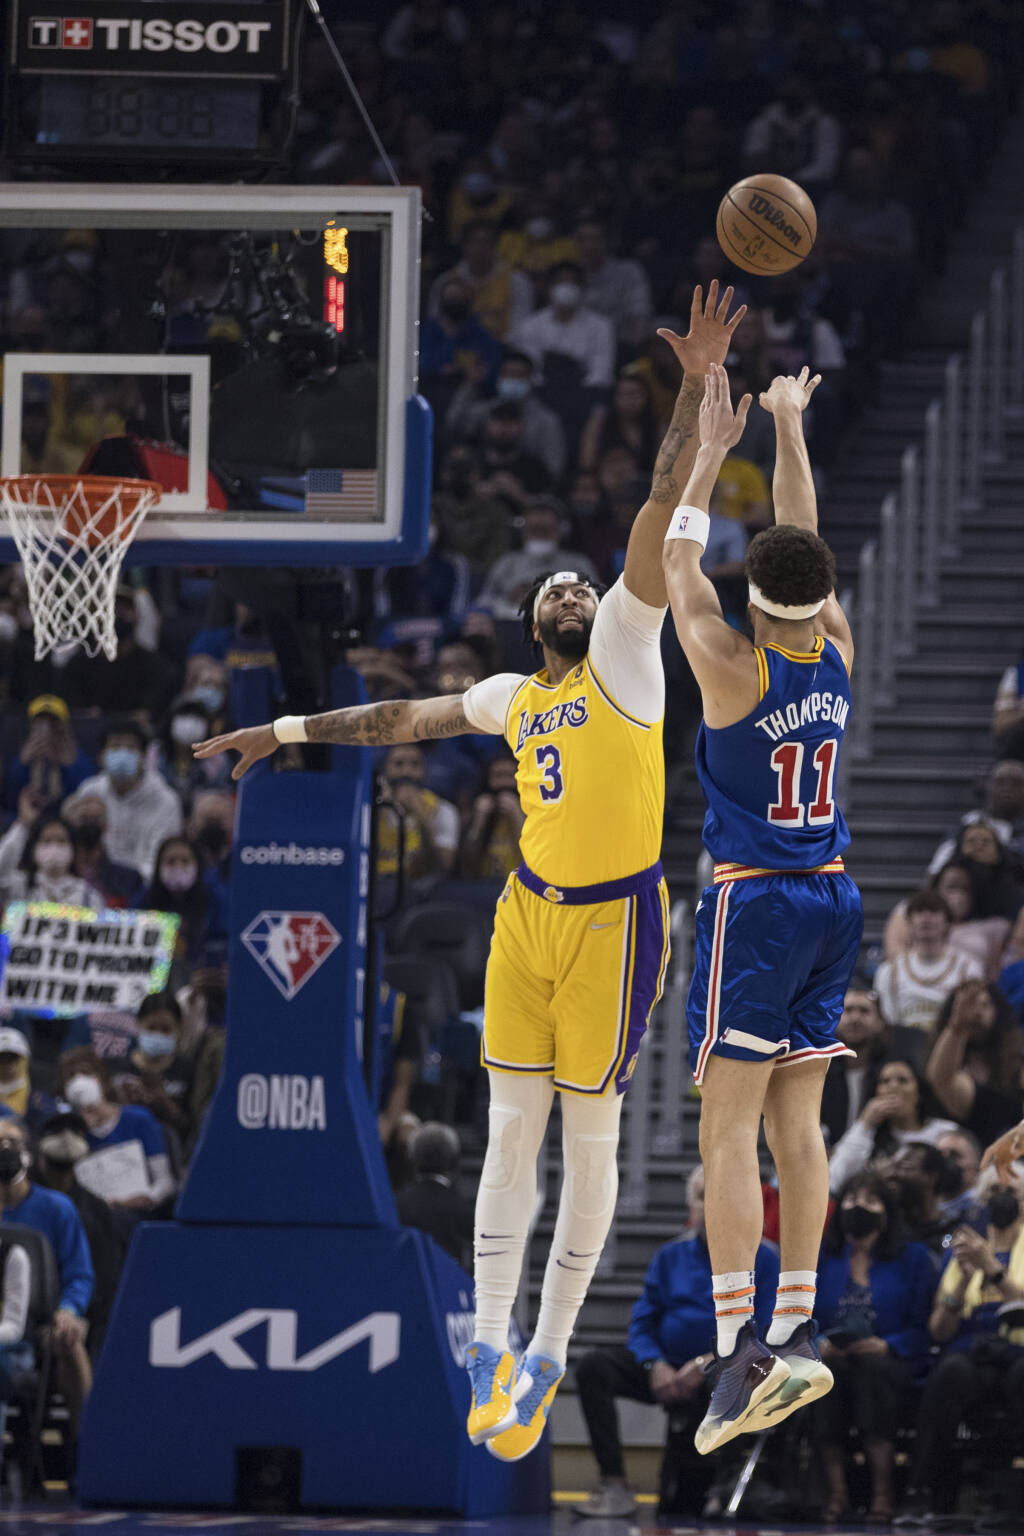 Warriors-Lakers: Klay Thompson goes off in Warriors' win